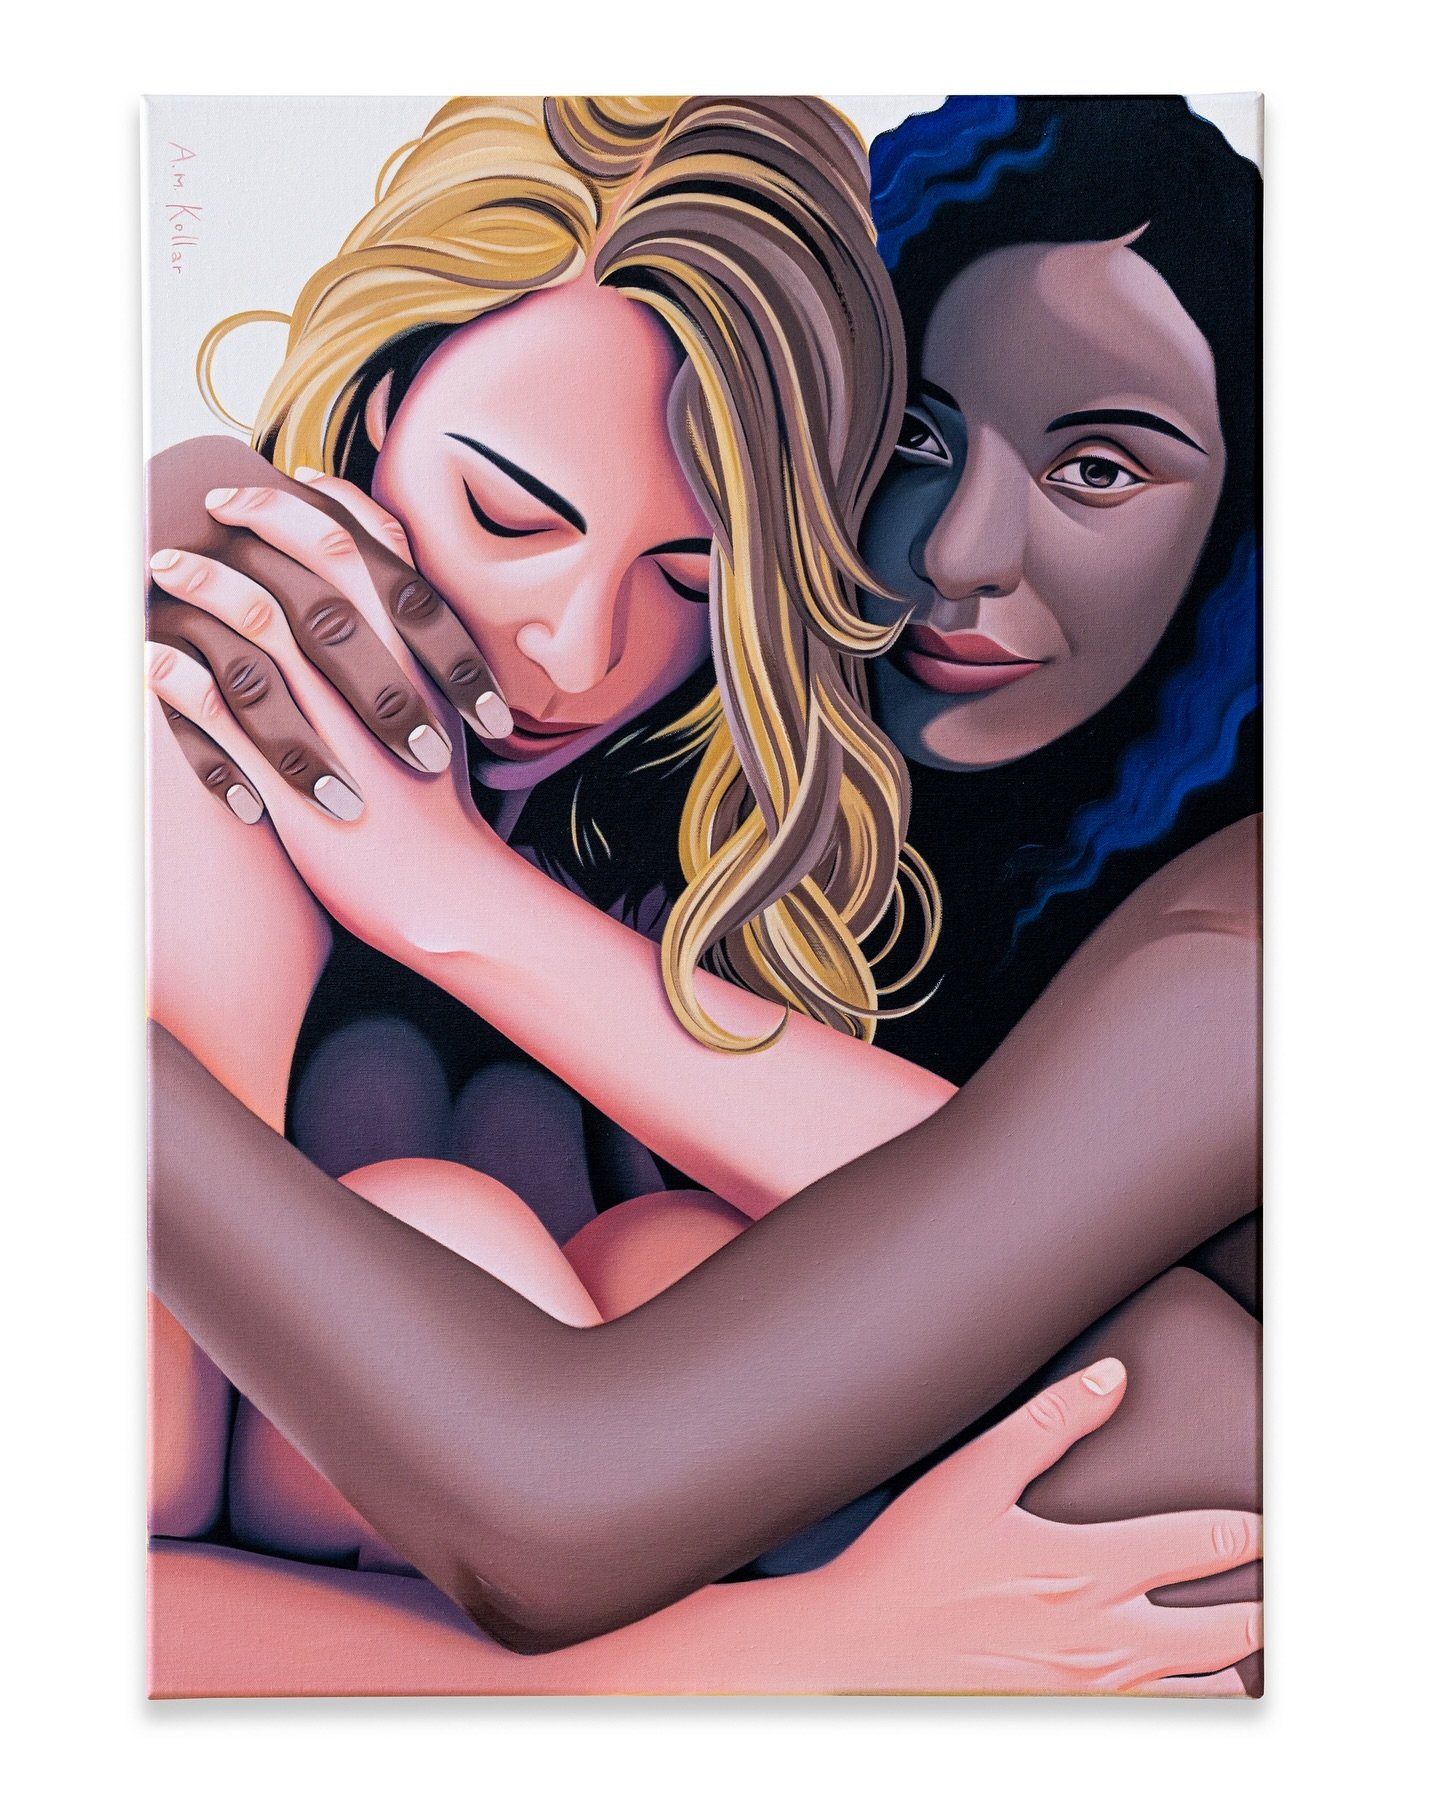 This is my second picture from this series and it again clearly shows what all my art is about, namely the deep and magical bond between women. What would we do without our friends, sisters, mothers and grandmothers? I can&rsquo;t imagine life withou